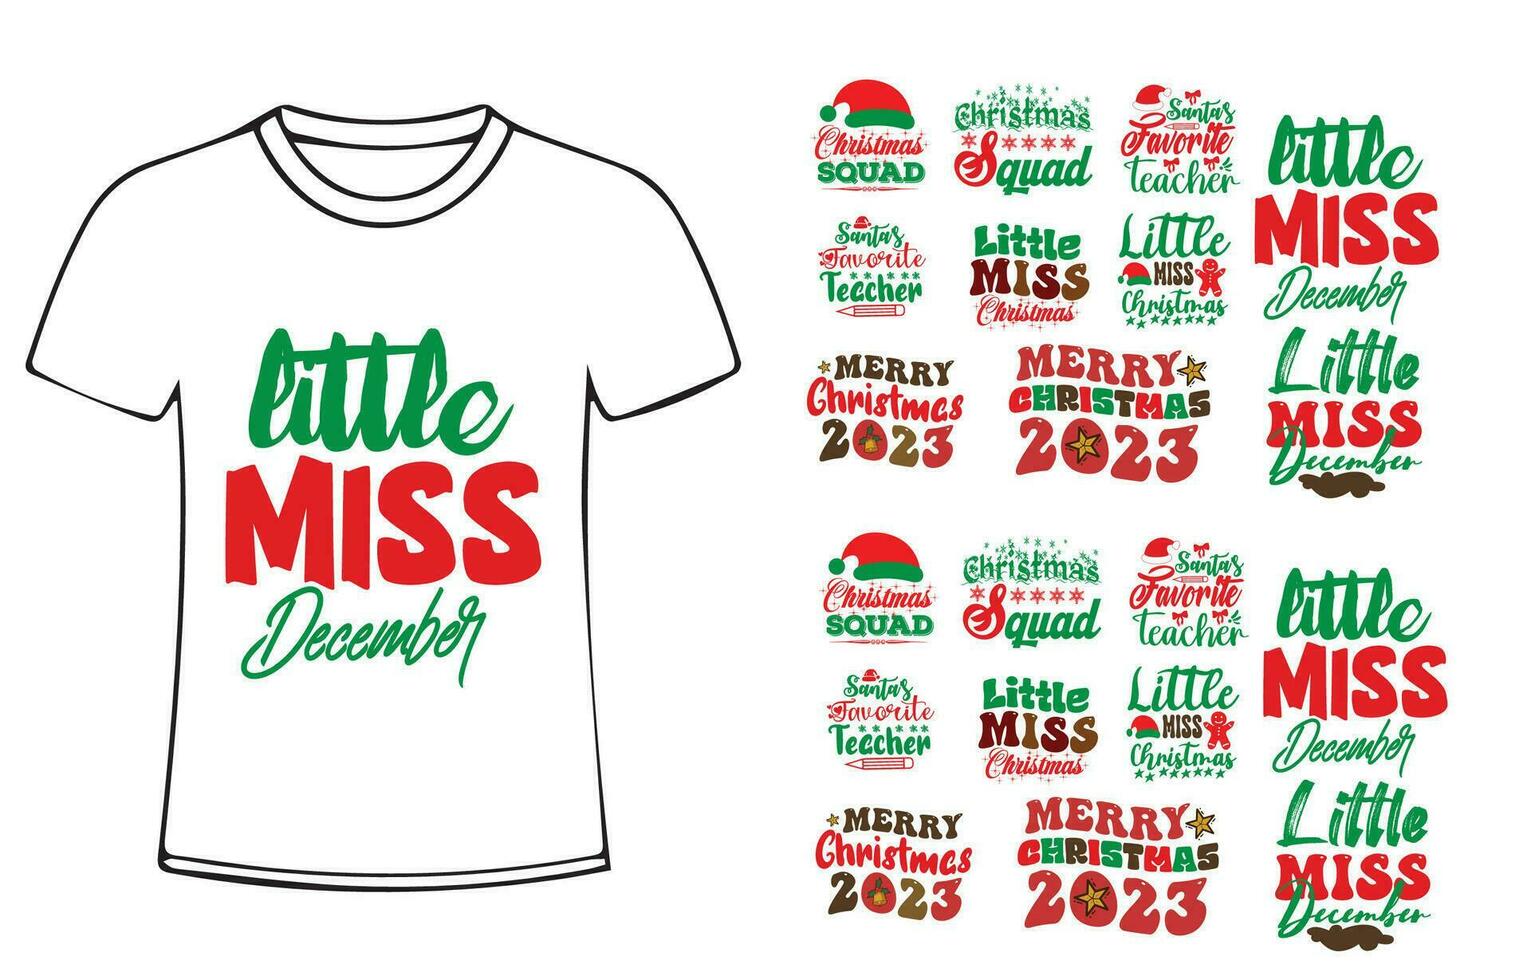 Christmas quote new t shirt design for t-shirt, cards, frame artwork, bags, mugs, stickers, tumblers, phone cases, print etc. vector